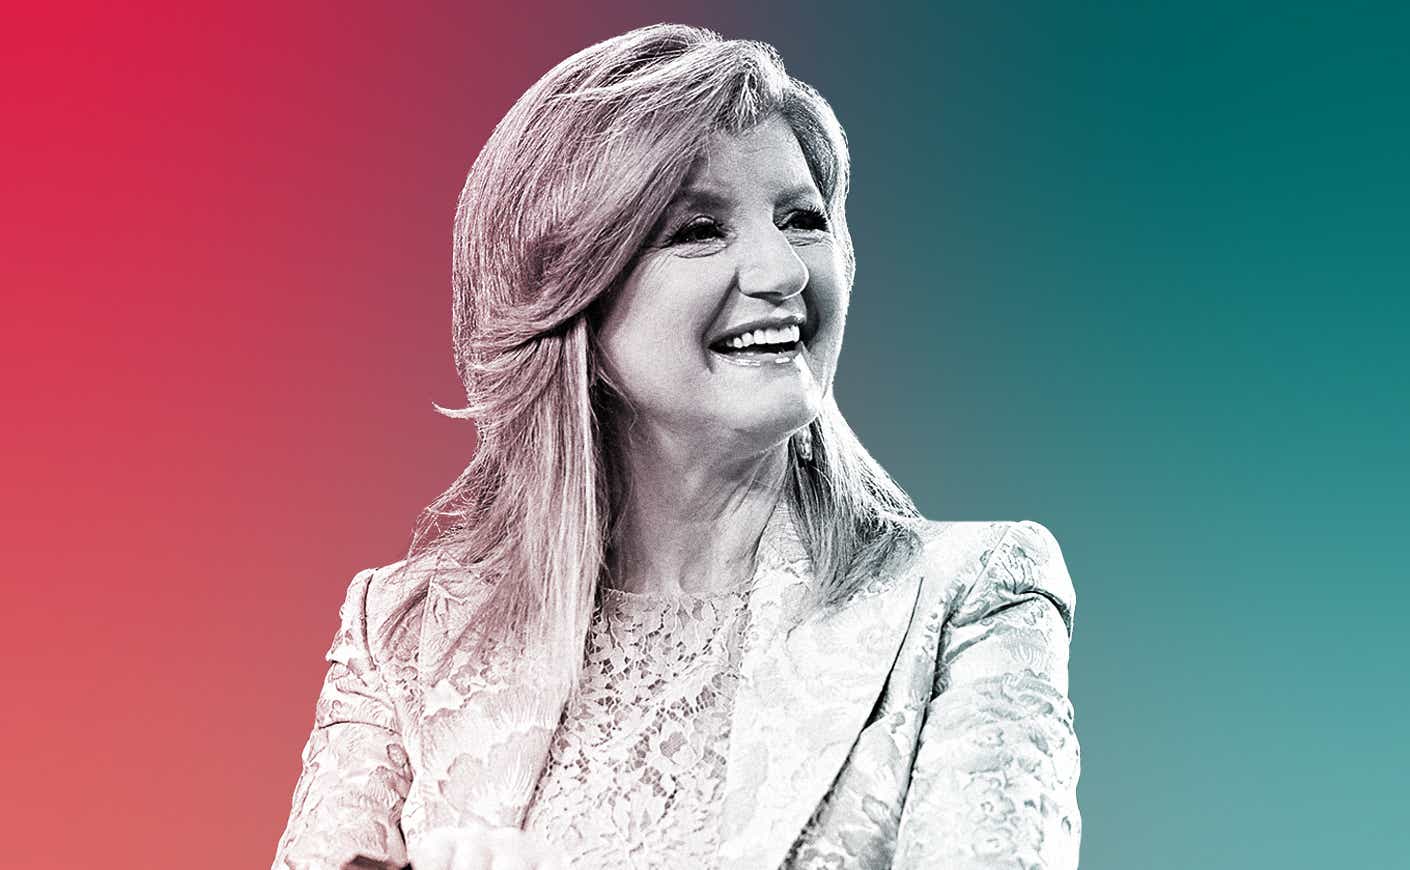 A black and white image of Ariana Huffington smiling superimposed over a red and green background.